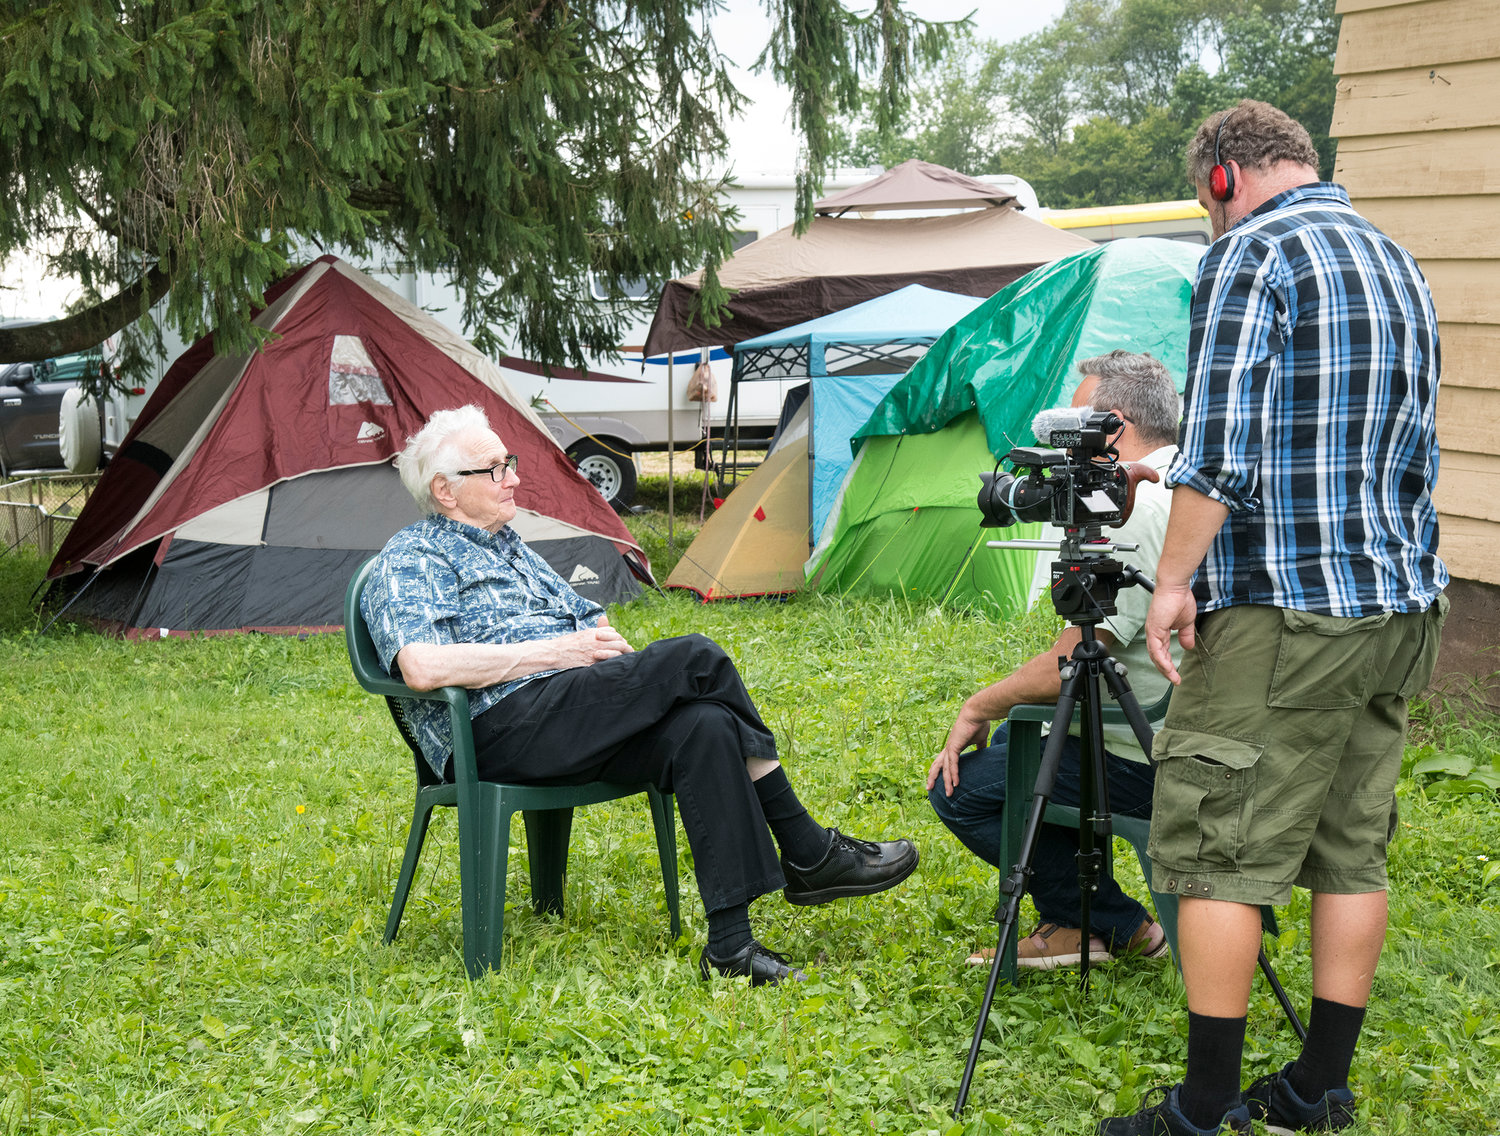 Known as the man who gave the Woodstock Concert its sound, recording and sound engineer, Bill Hanley is interviewed outside of the Yasgur  family farm house at the Yasgur Road Production’s campground and concert site.